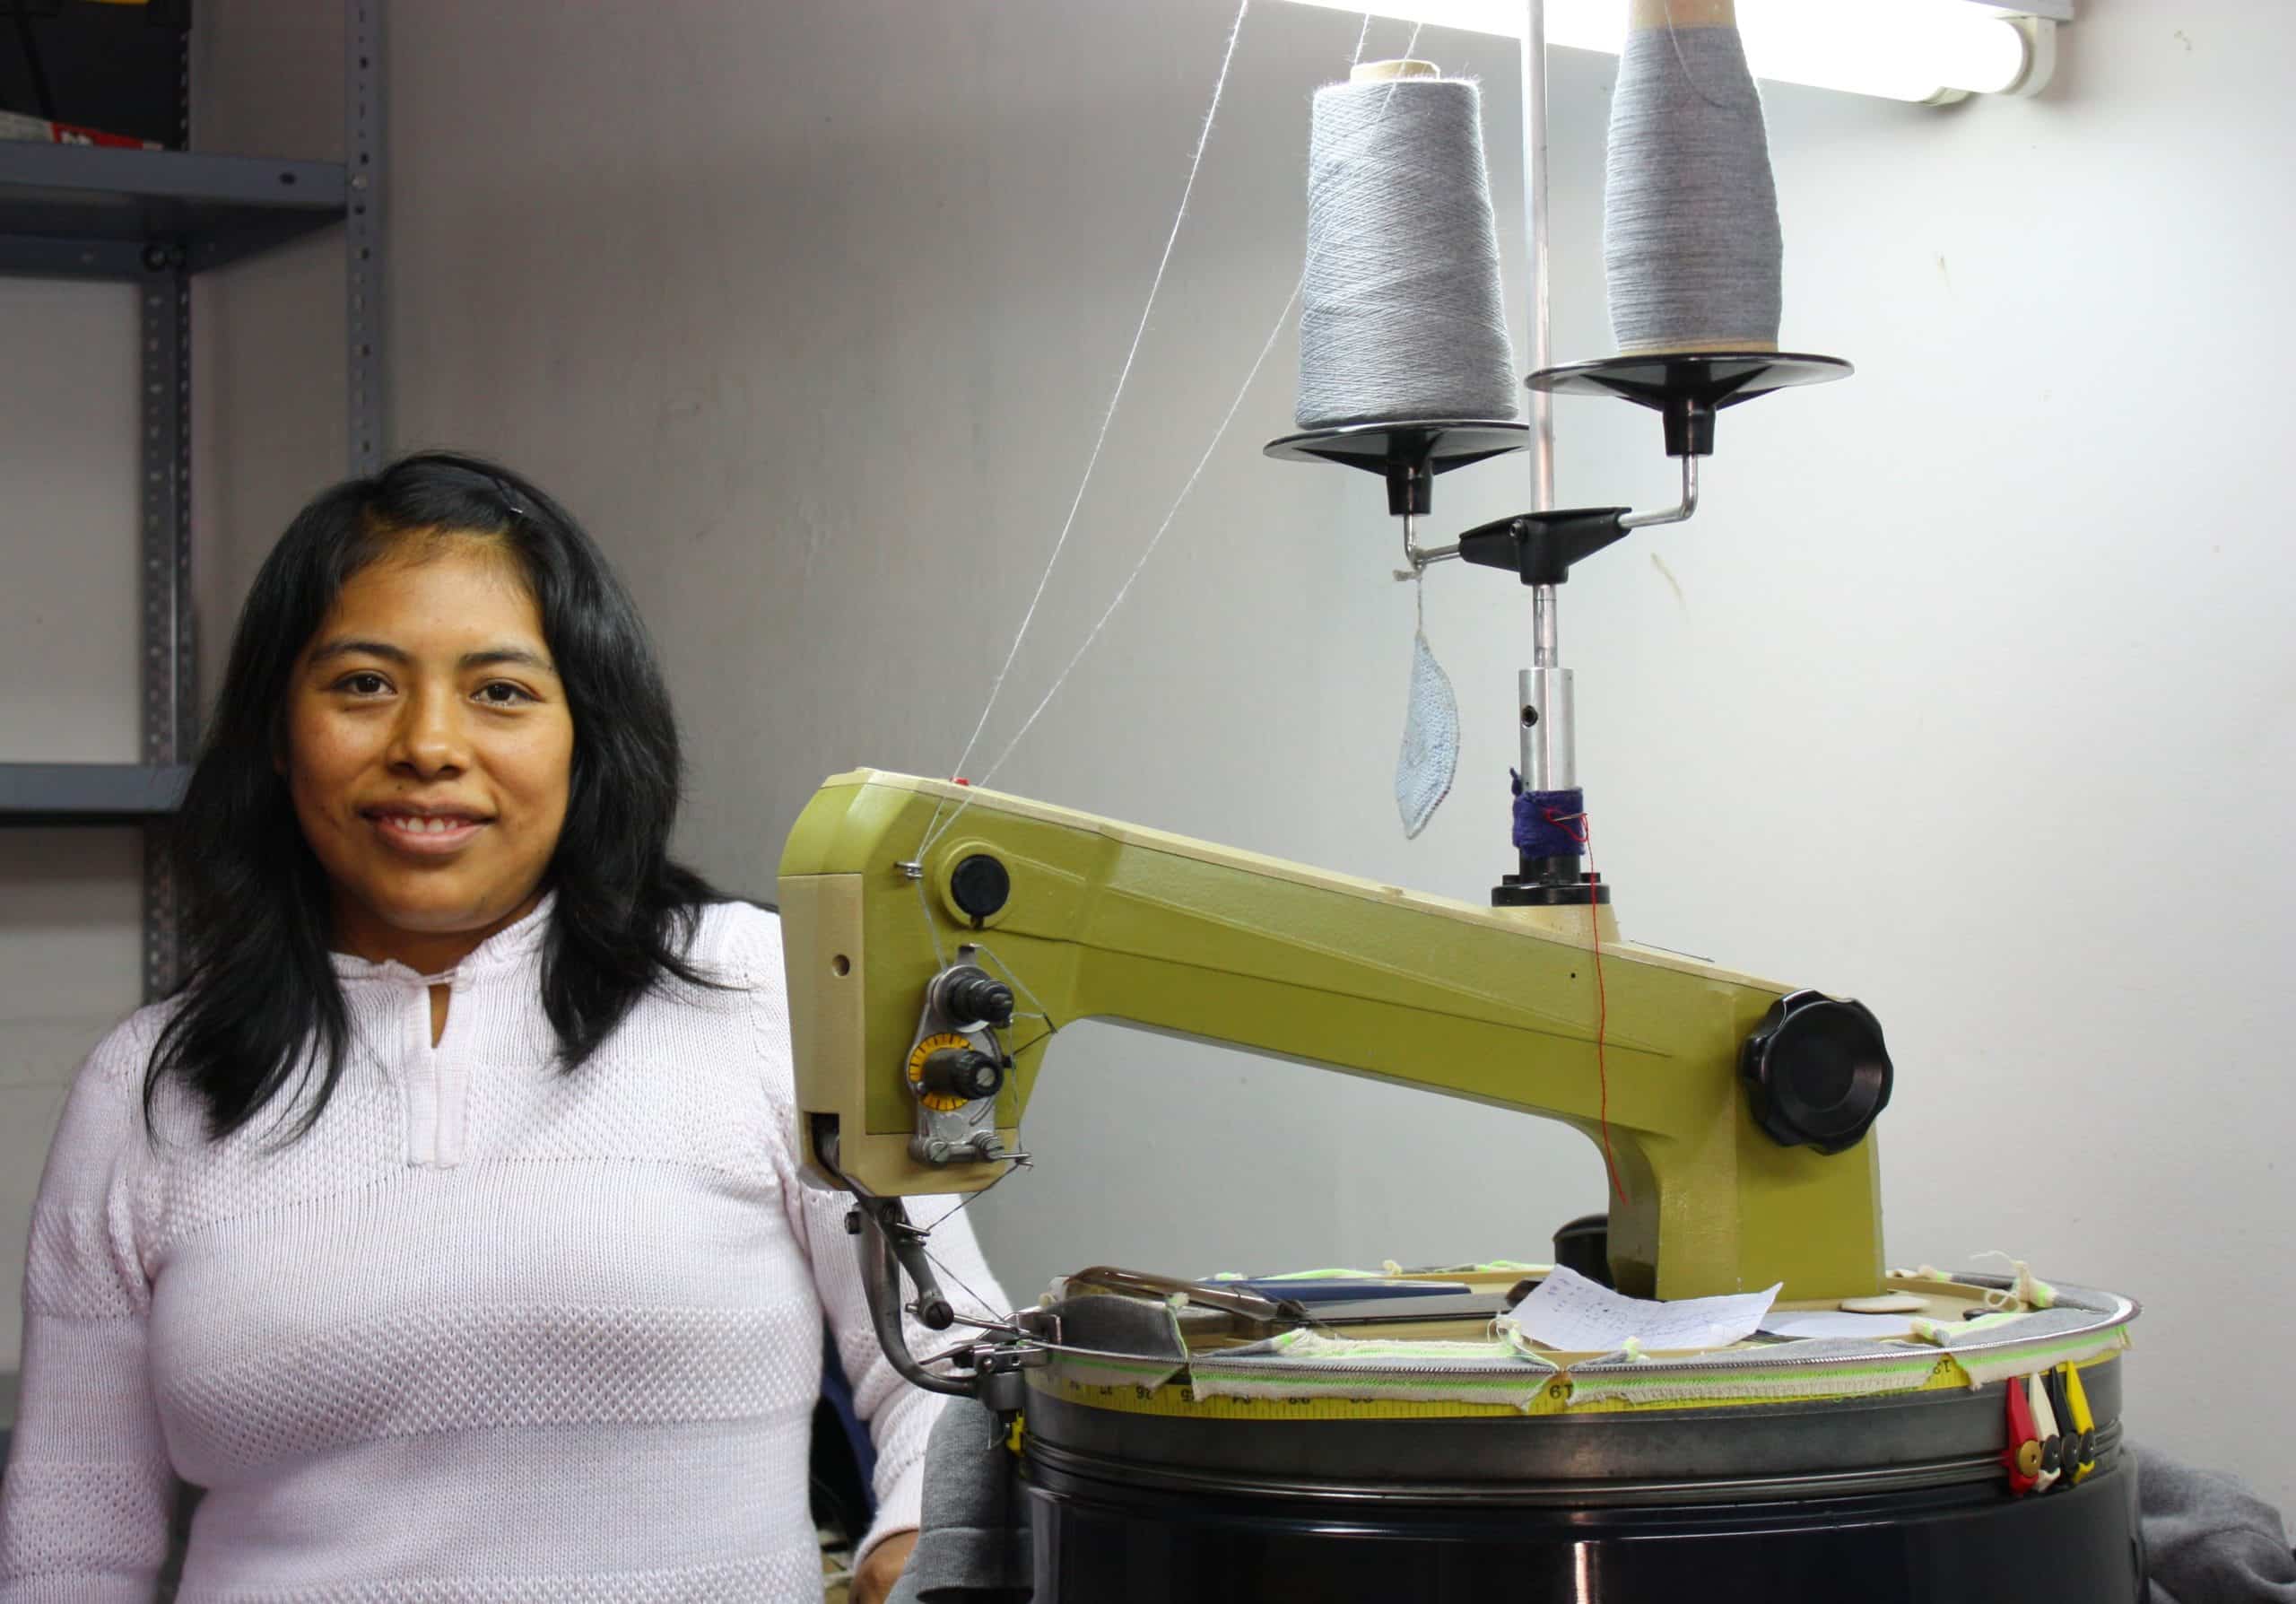 How this Peruvian Artisan is Running a Business on Her Own Terms